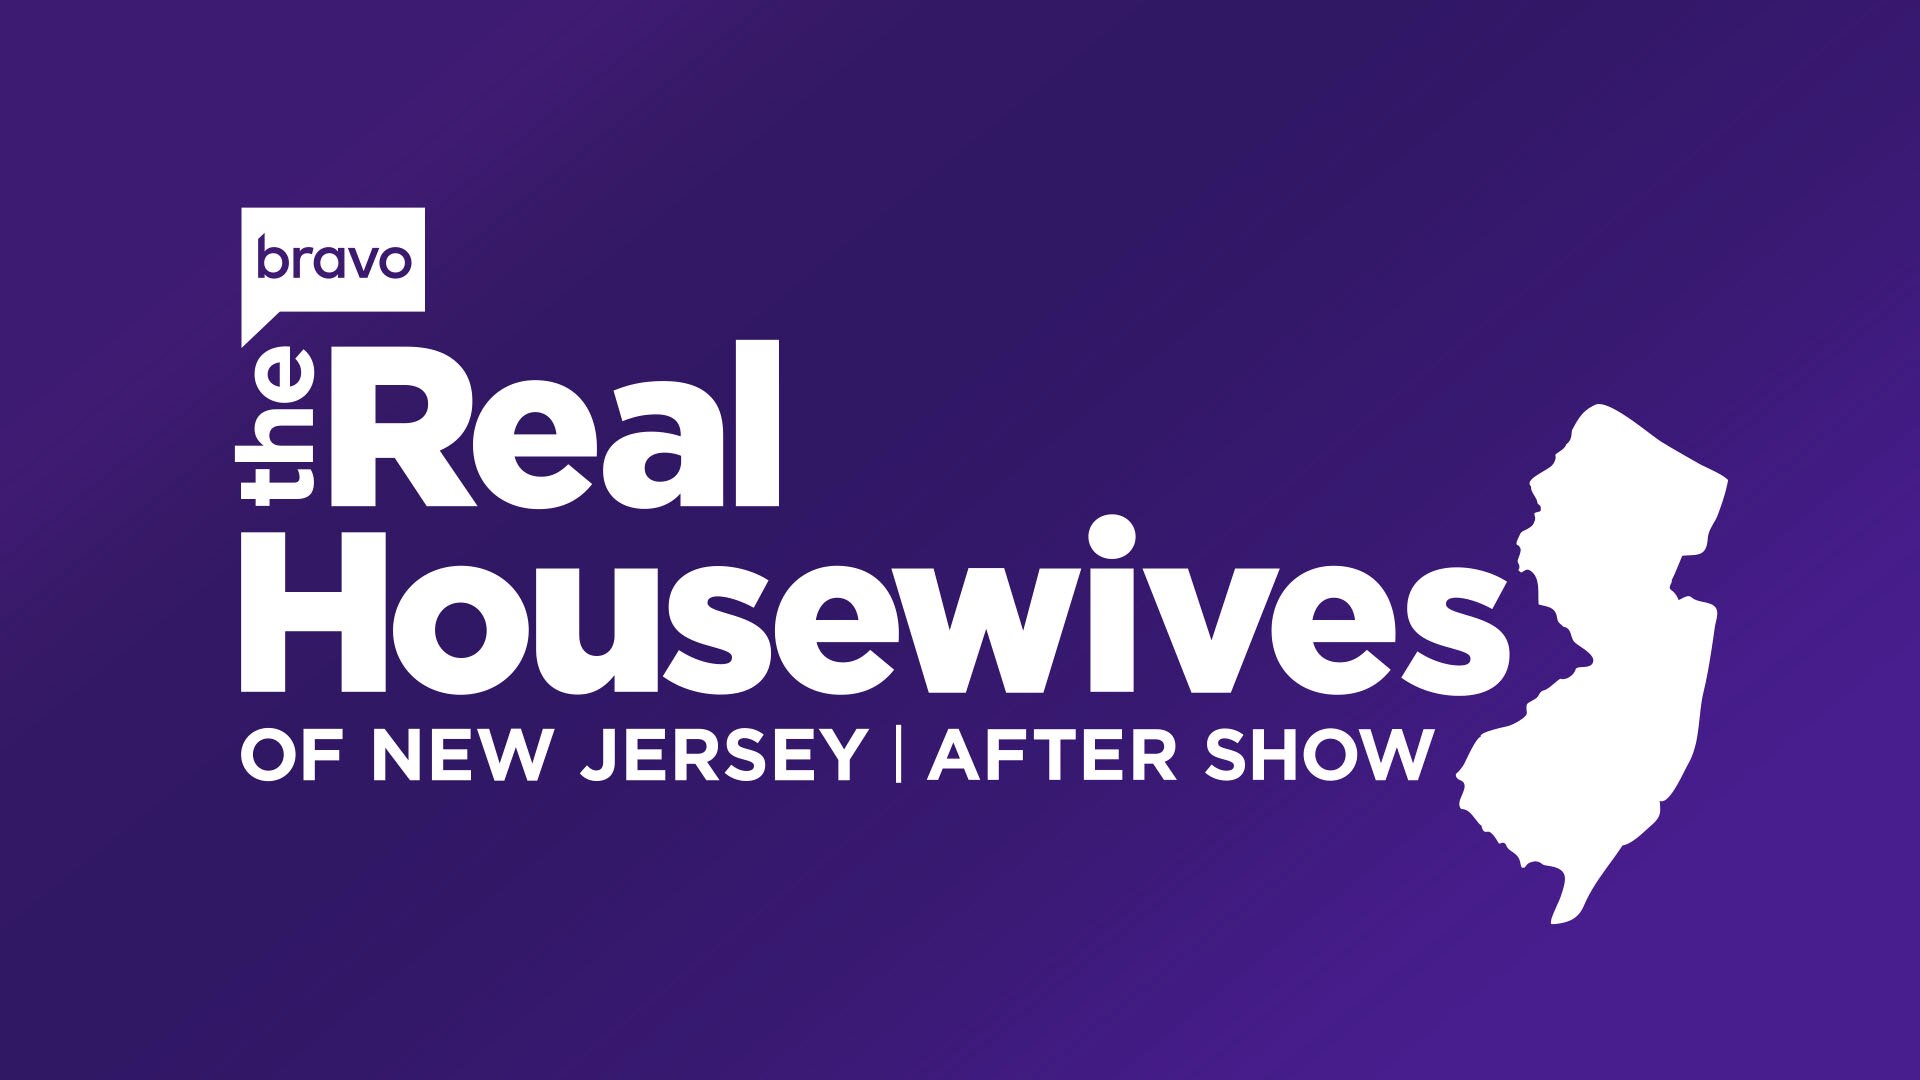 The Real Housewives of New Jersey After Show